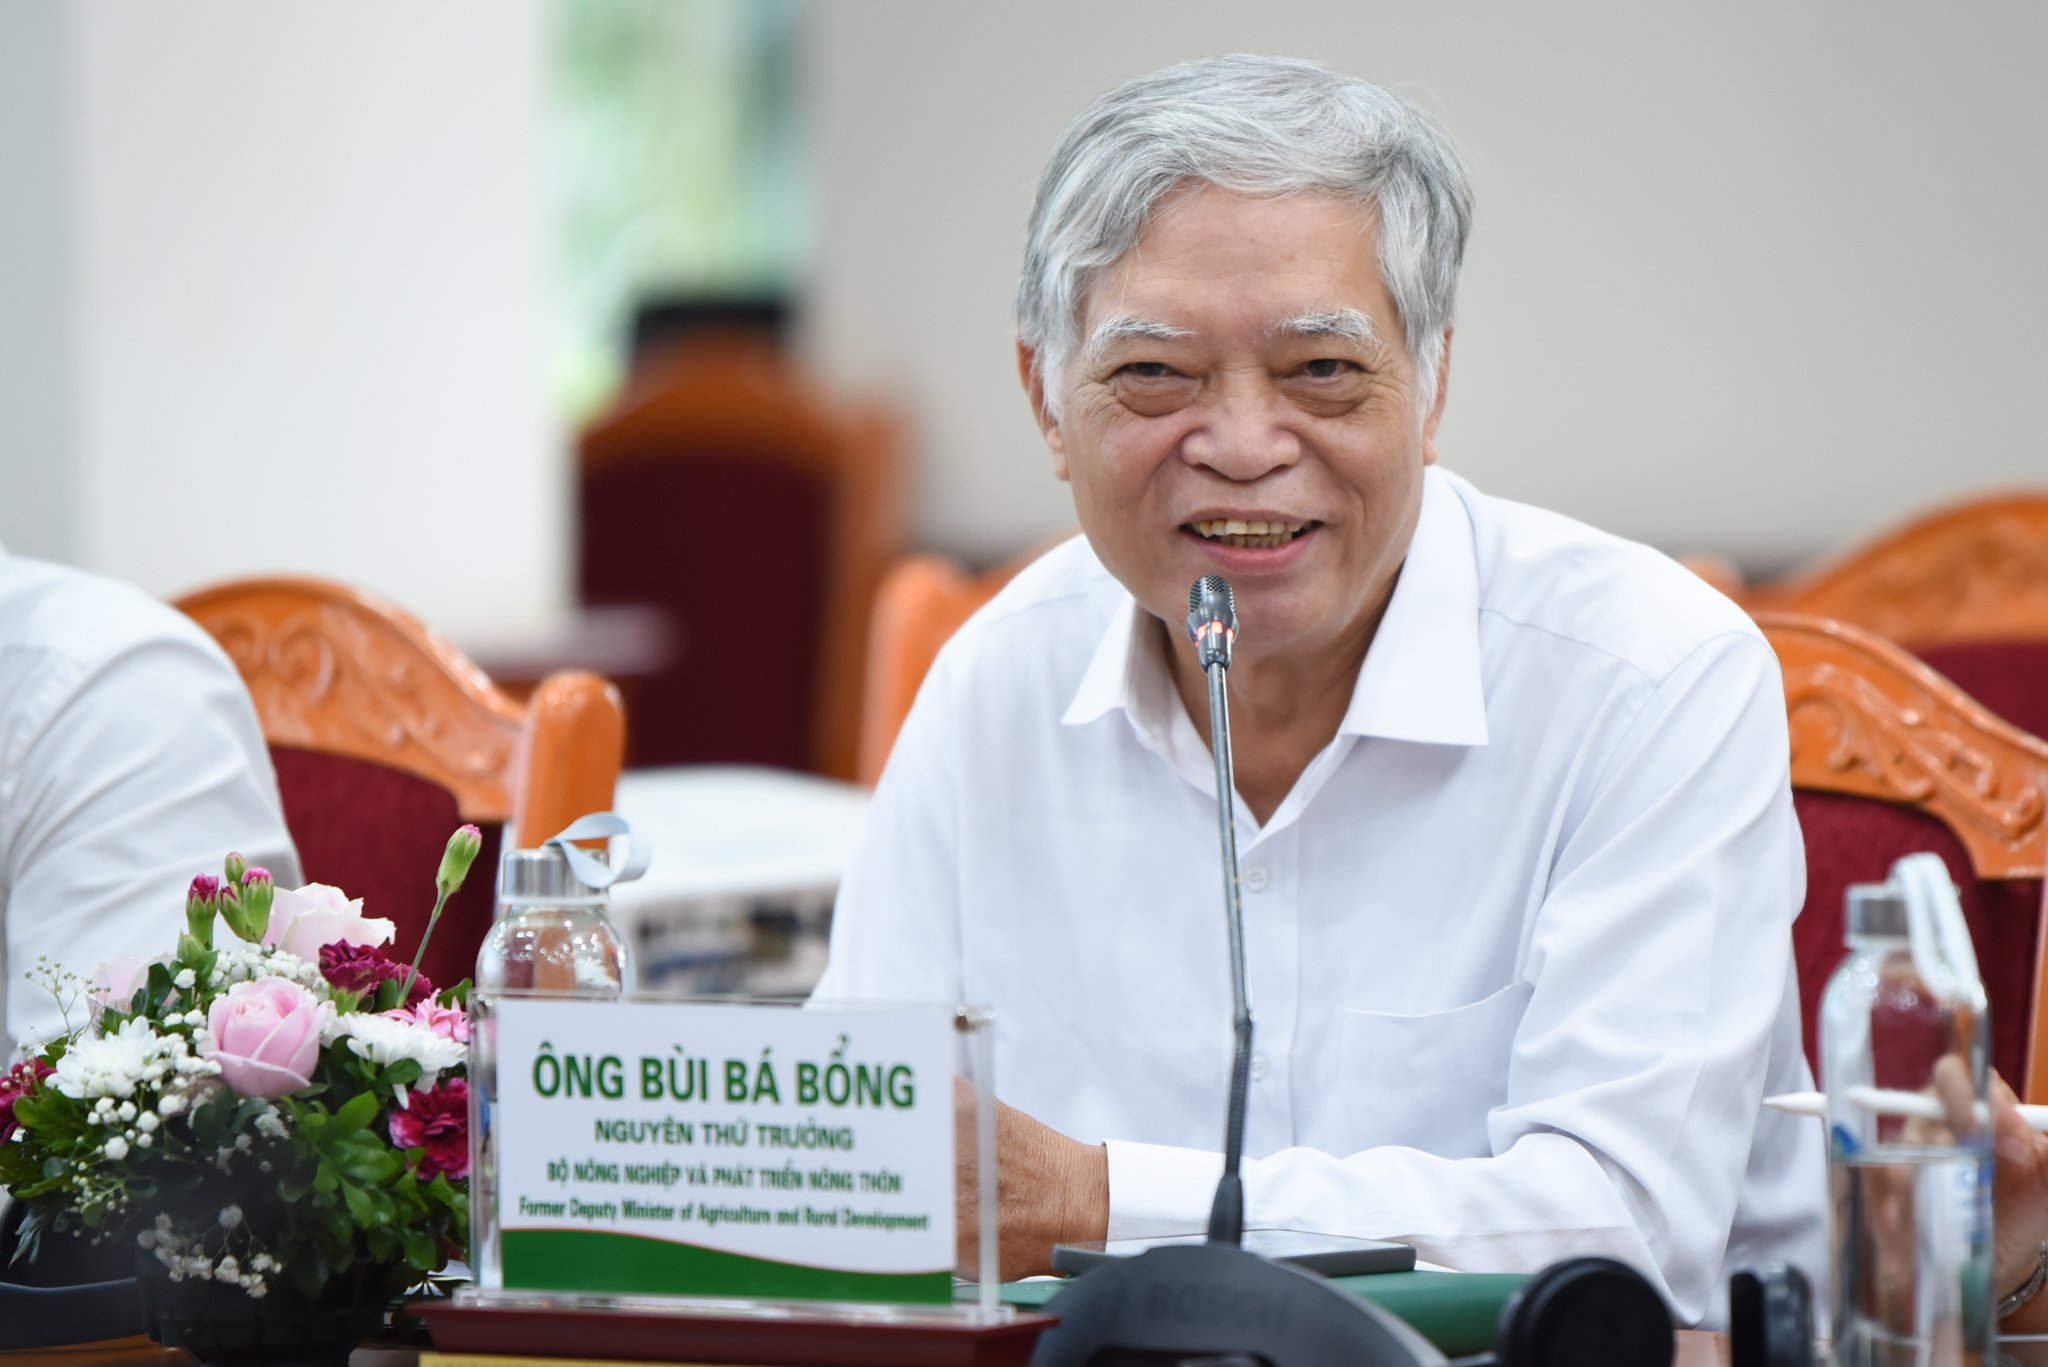 Dr. Bui Ba Bong, former Deputy Minister of Agriculture and Rural Development, commented on the action plan to implement the green growth strategy. Photo: Tung Dinh.